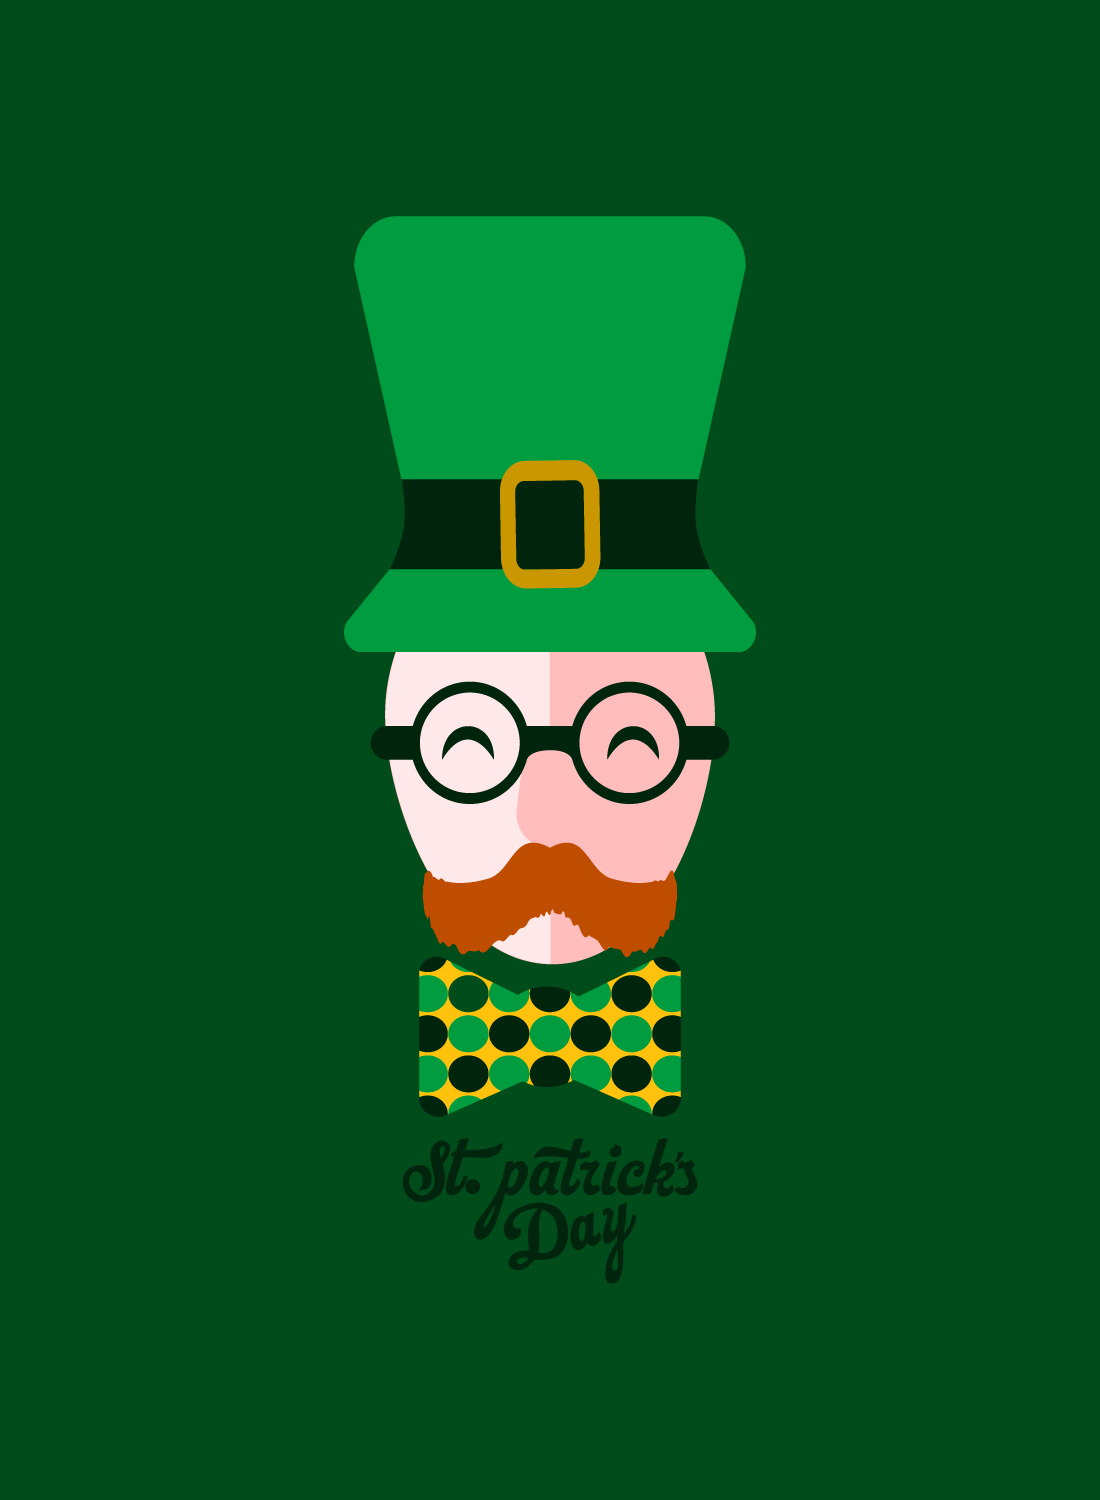 St patrick's day poster with a man in a green hat and glasses.